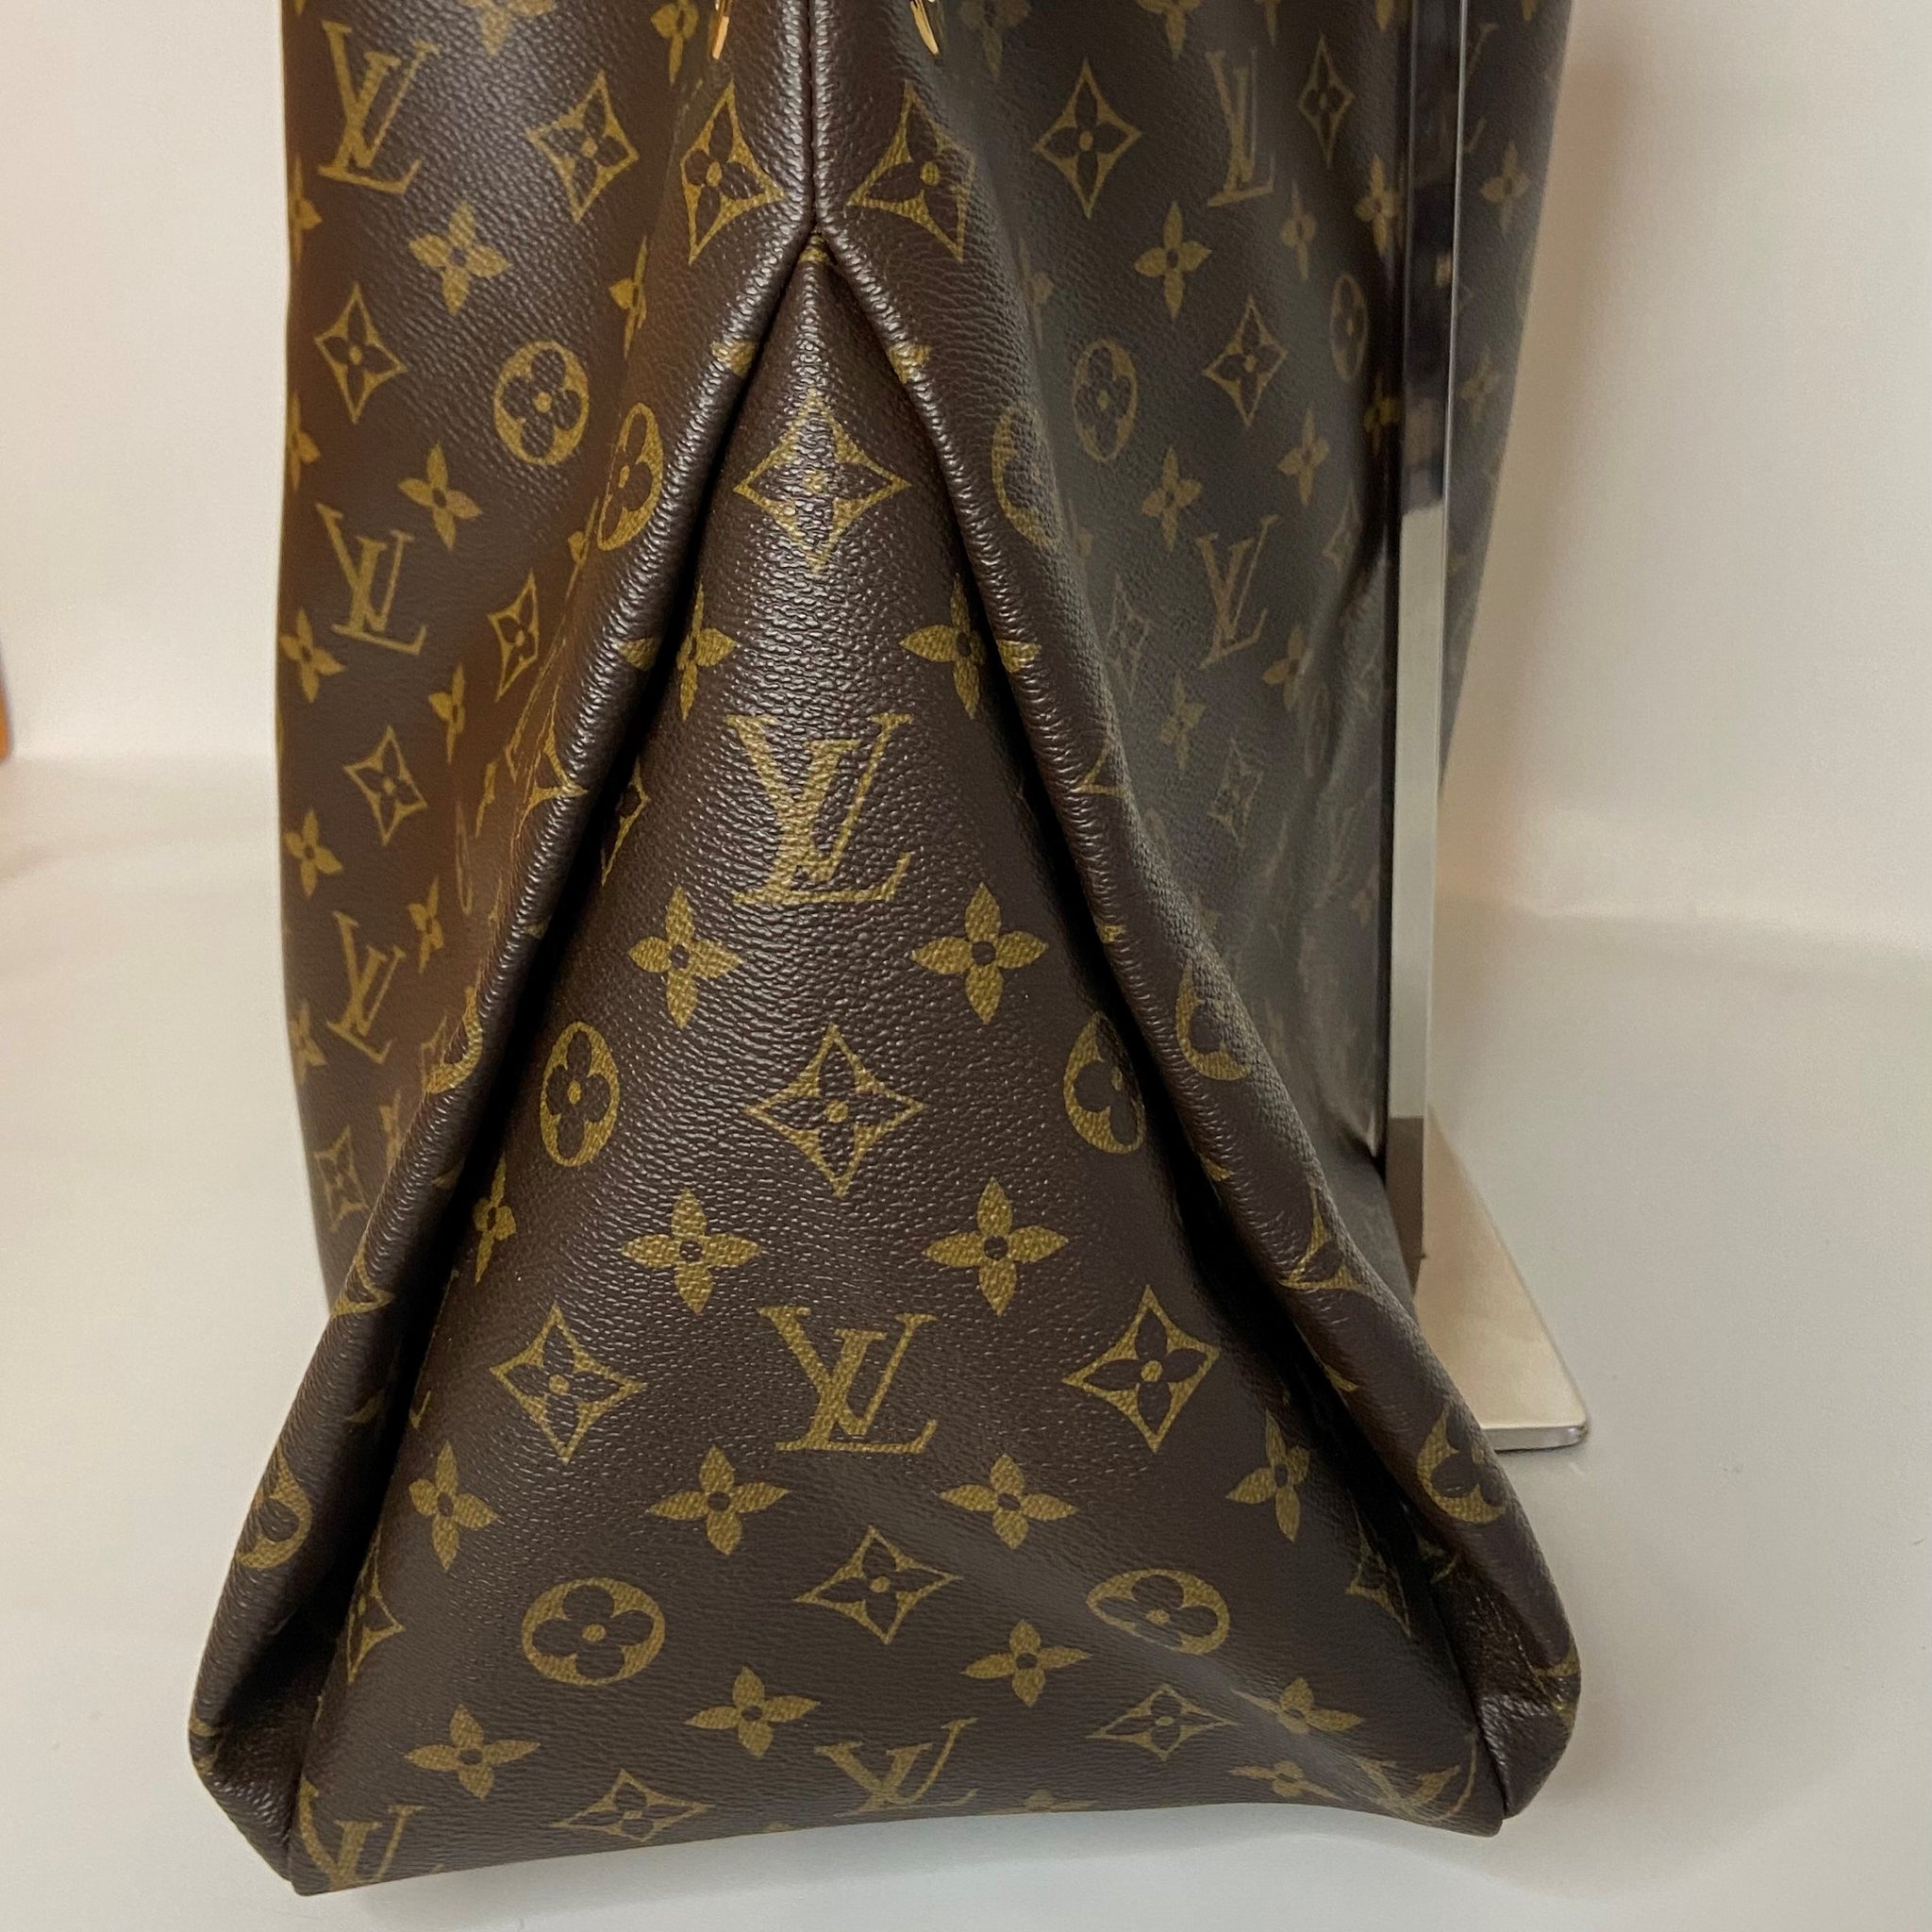 Louis Vuitton Artsy vs Neverfull: Which to Buy?